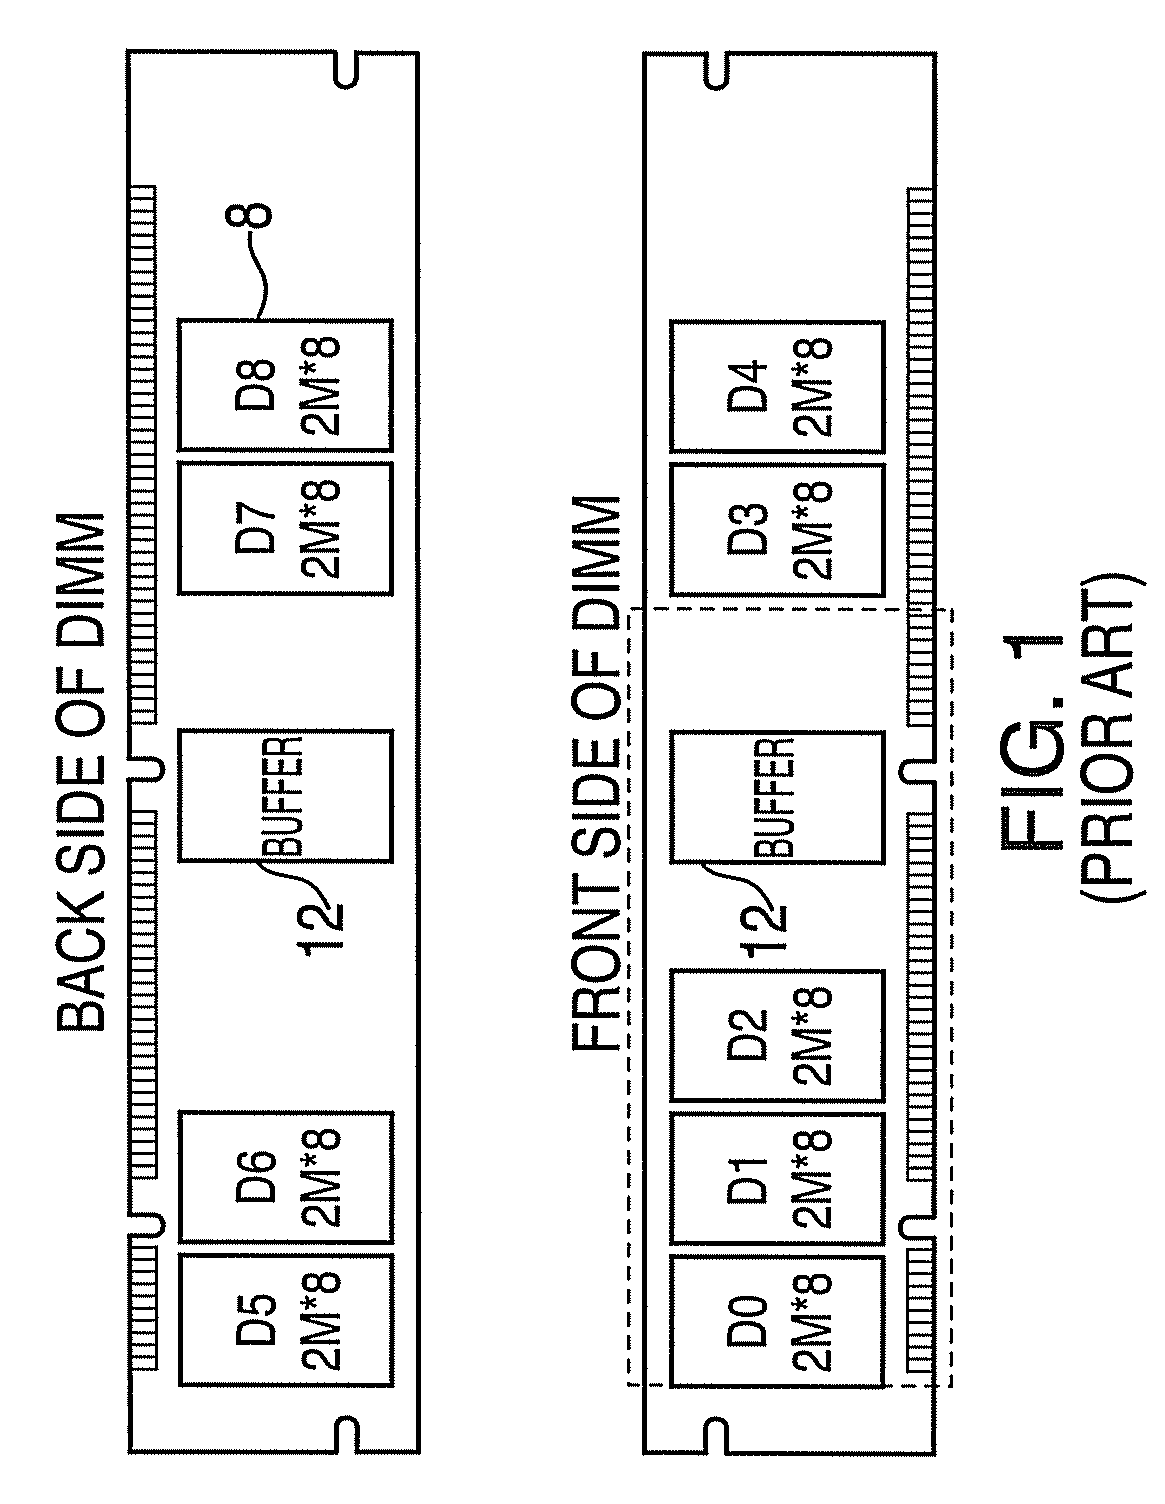 Systems and methods for providing data modification operations in memory subsystems